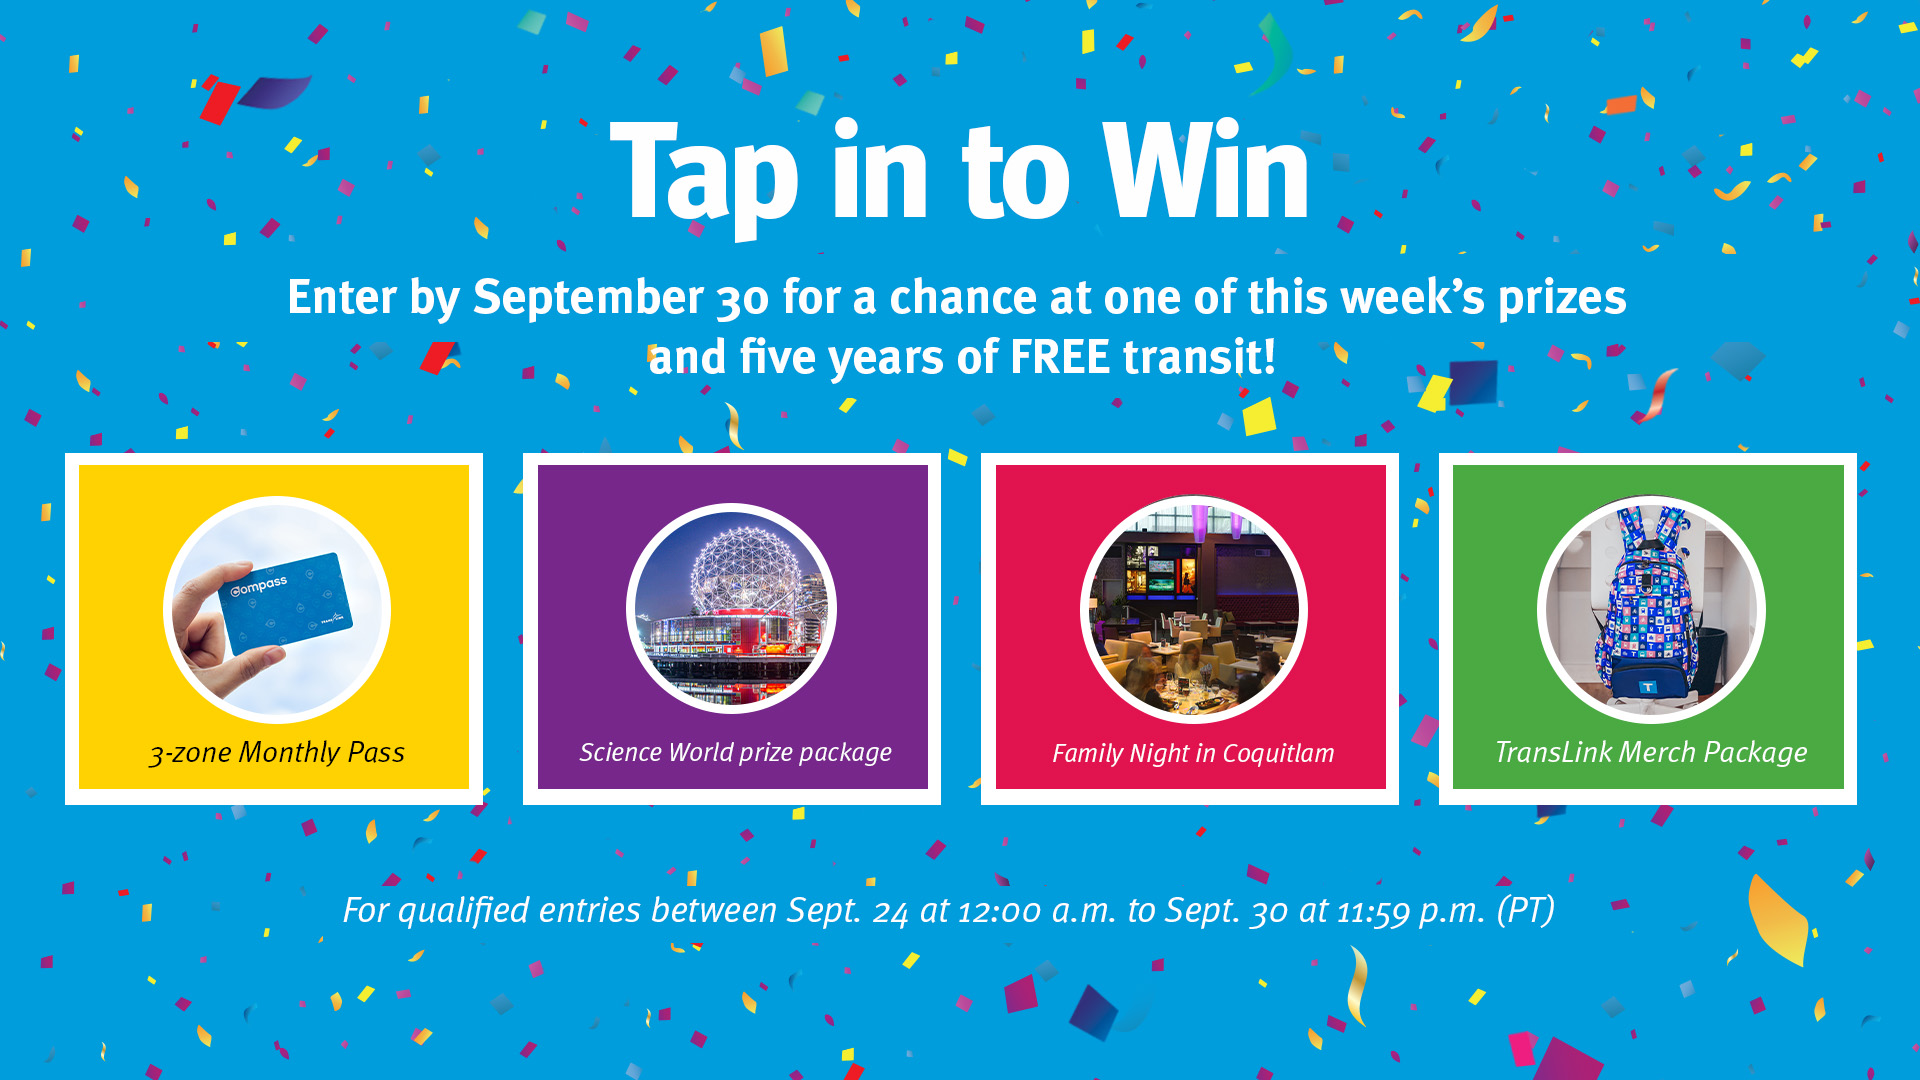 Enter by September 30 for a chance at one of six prizes: Compass Monthly Pass, Science World prize package, Family Night at Coquitlam Stay and Play package, and transit merchandise.